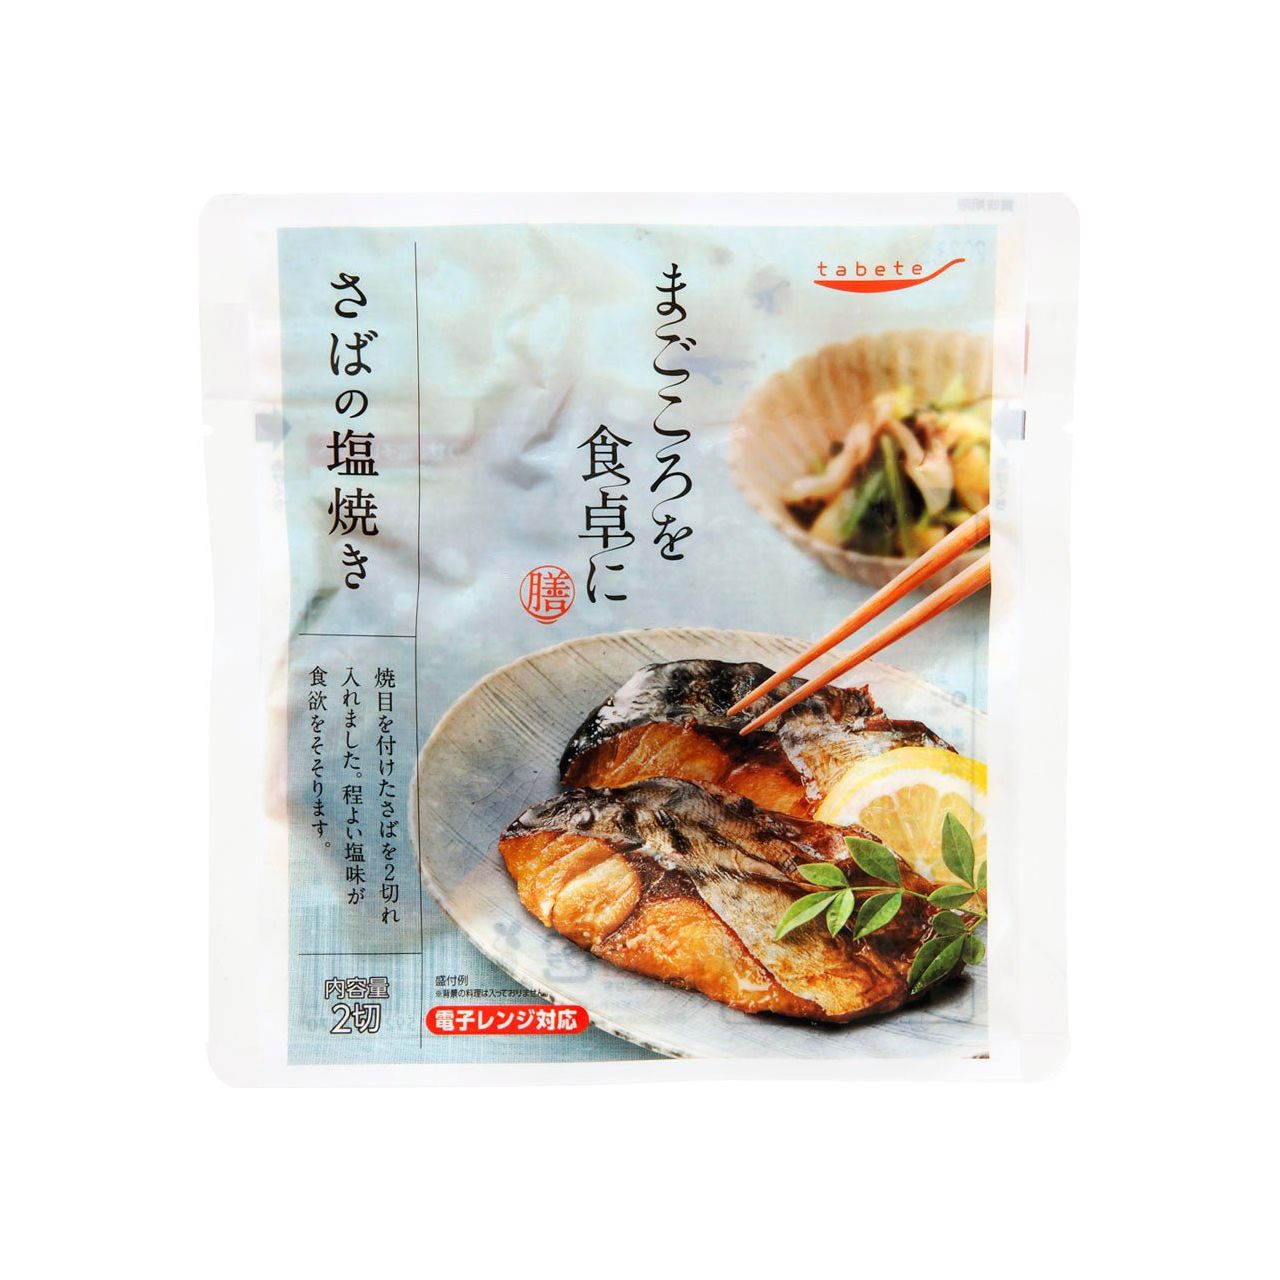 tabete まごころを食卓に 膳 さばの塩焼き - ROJI日本橋 ONLINE STORE